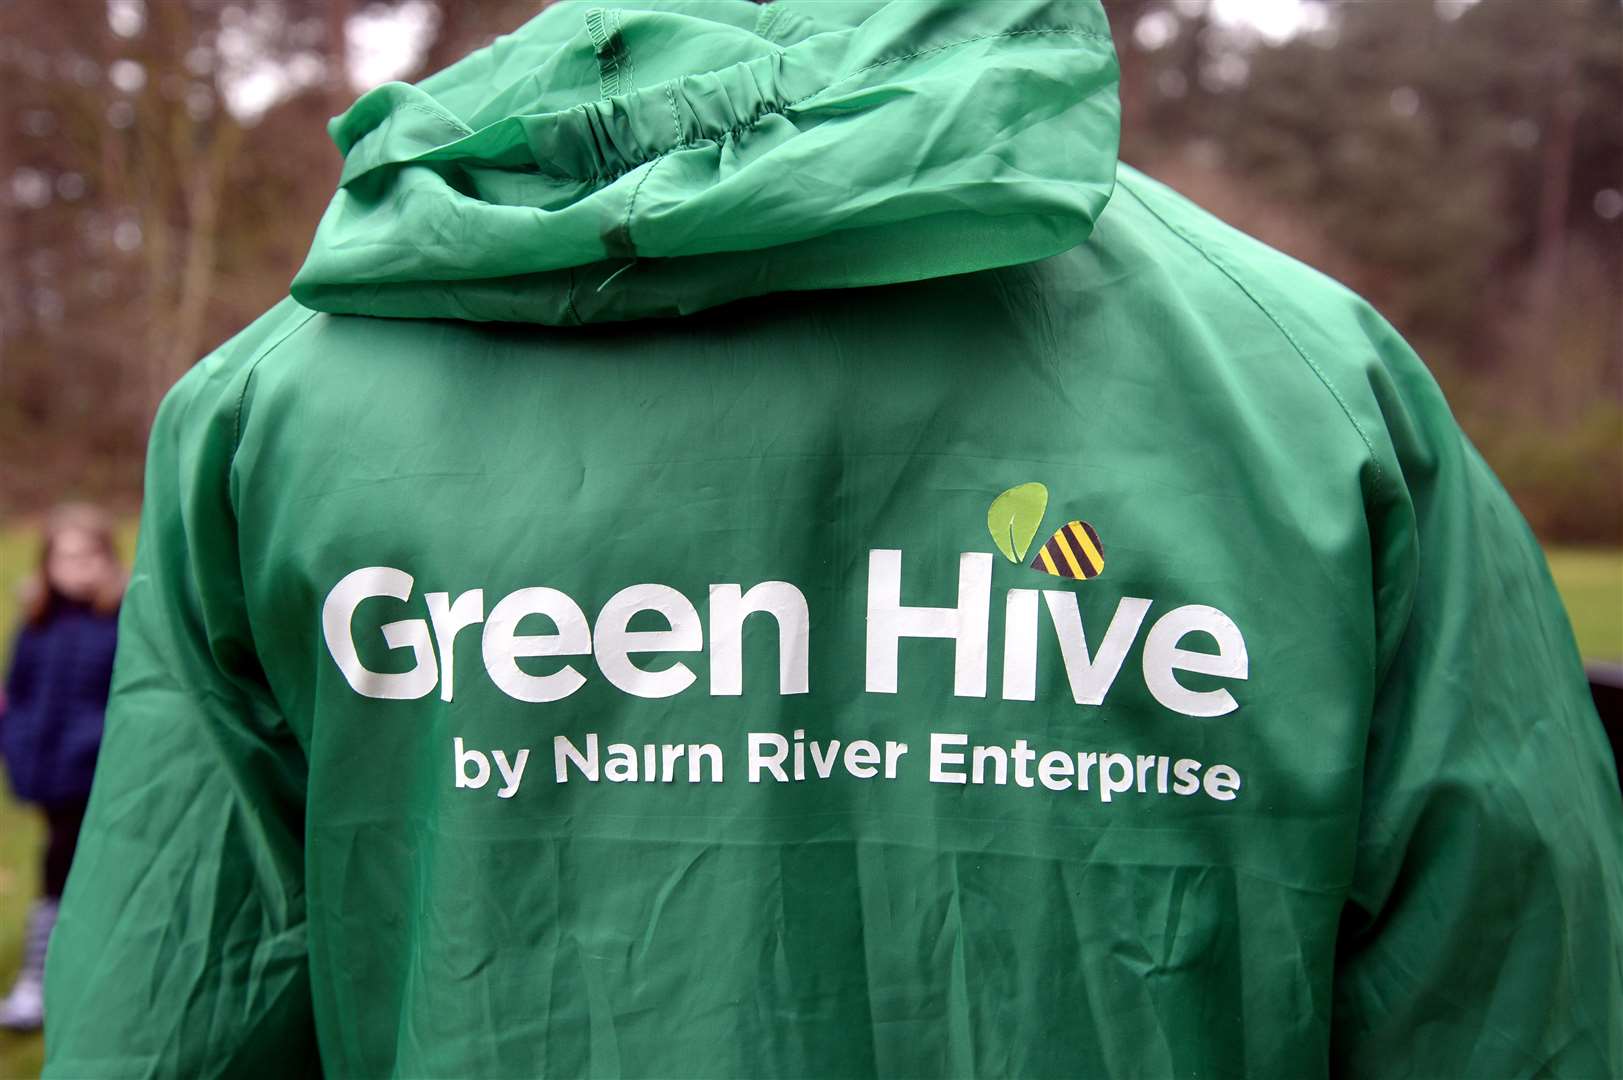 Green Hive is one of the charities awarded the funding of the new scheme. Picture: Gair Fraser.